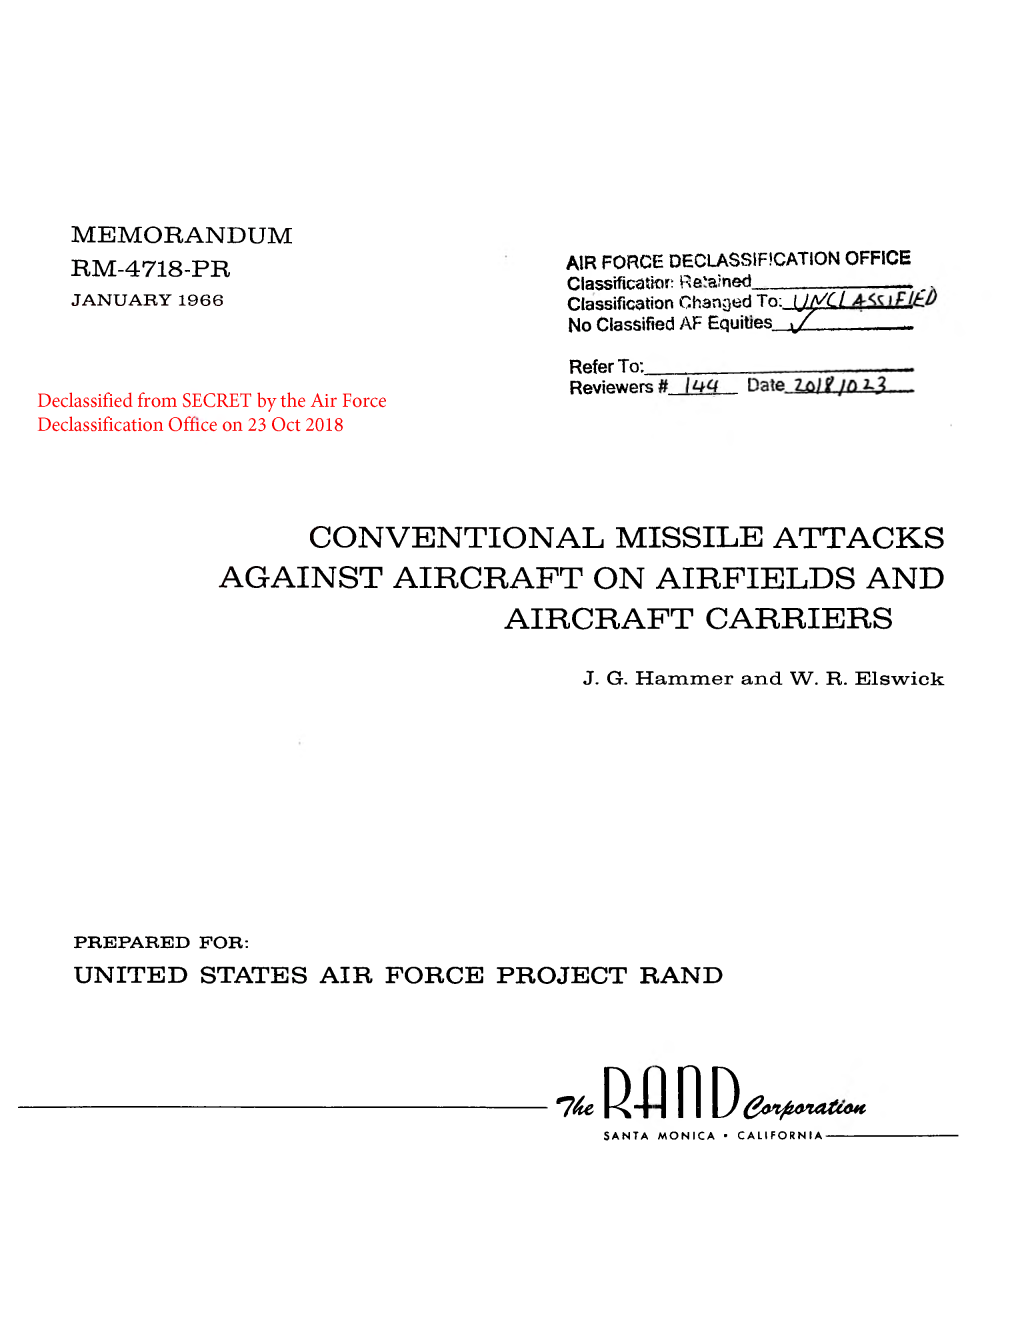 Conventional Missile Attacks Against Aircraft on Airfields and Aircraft Carriers